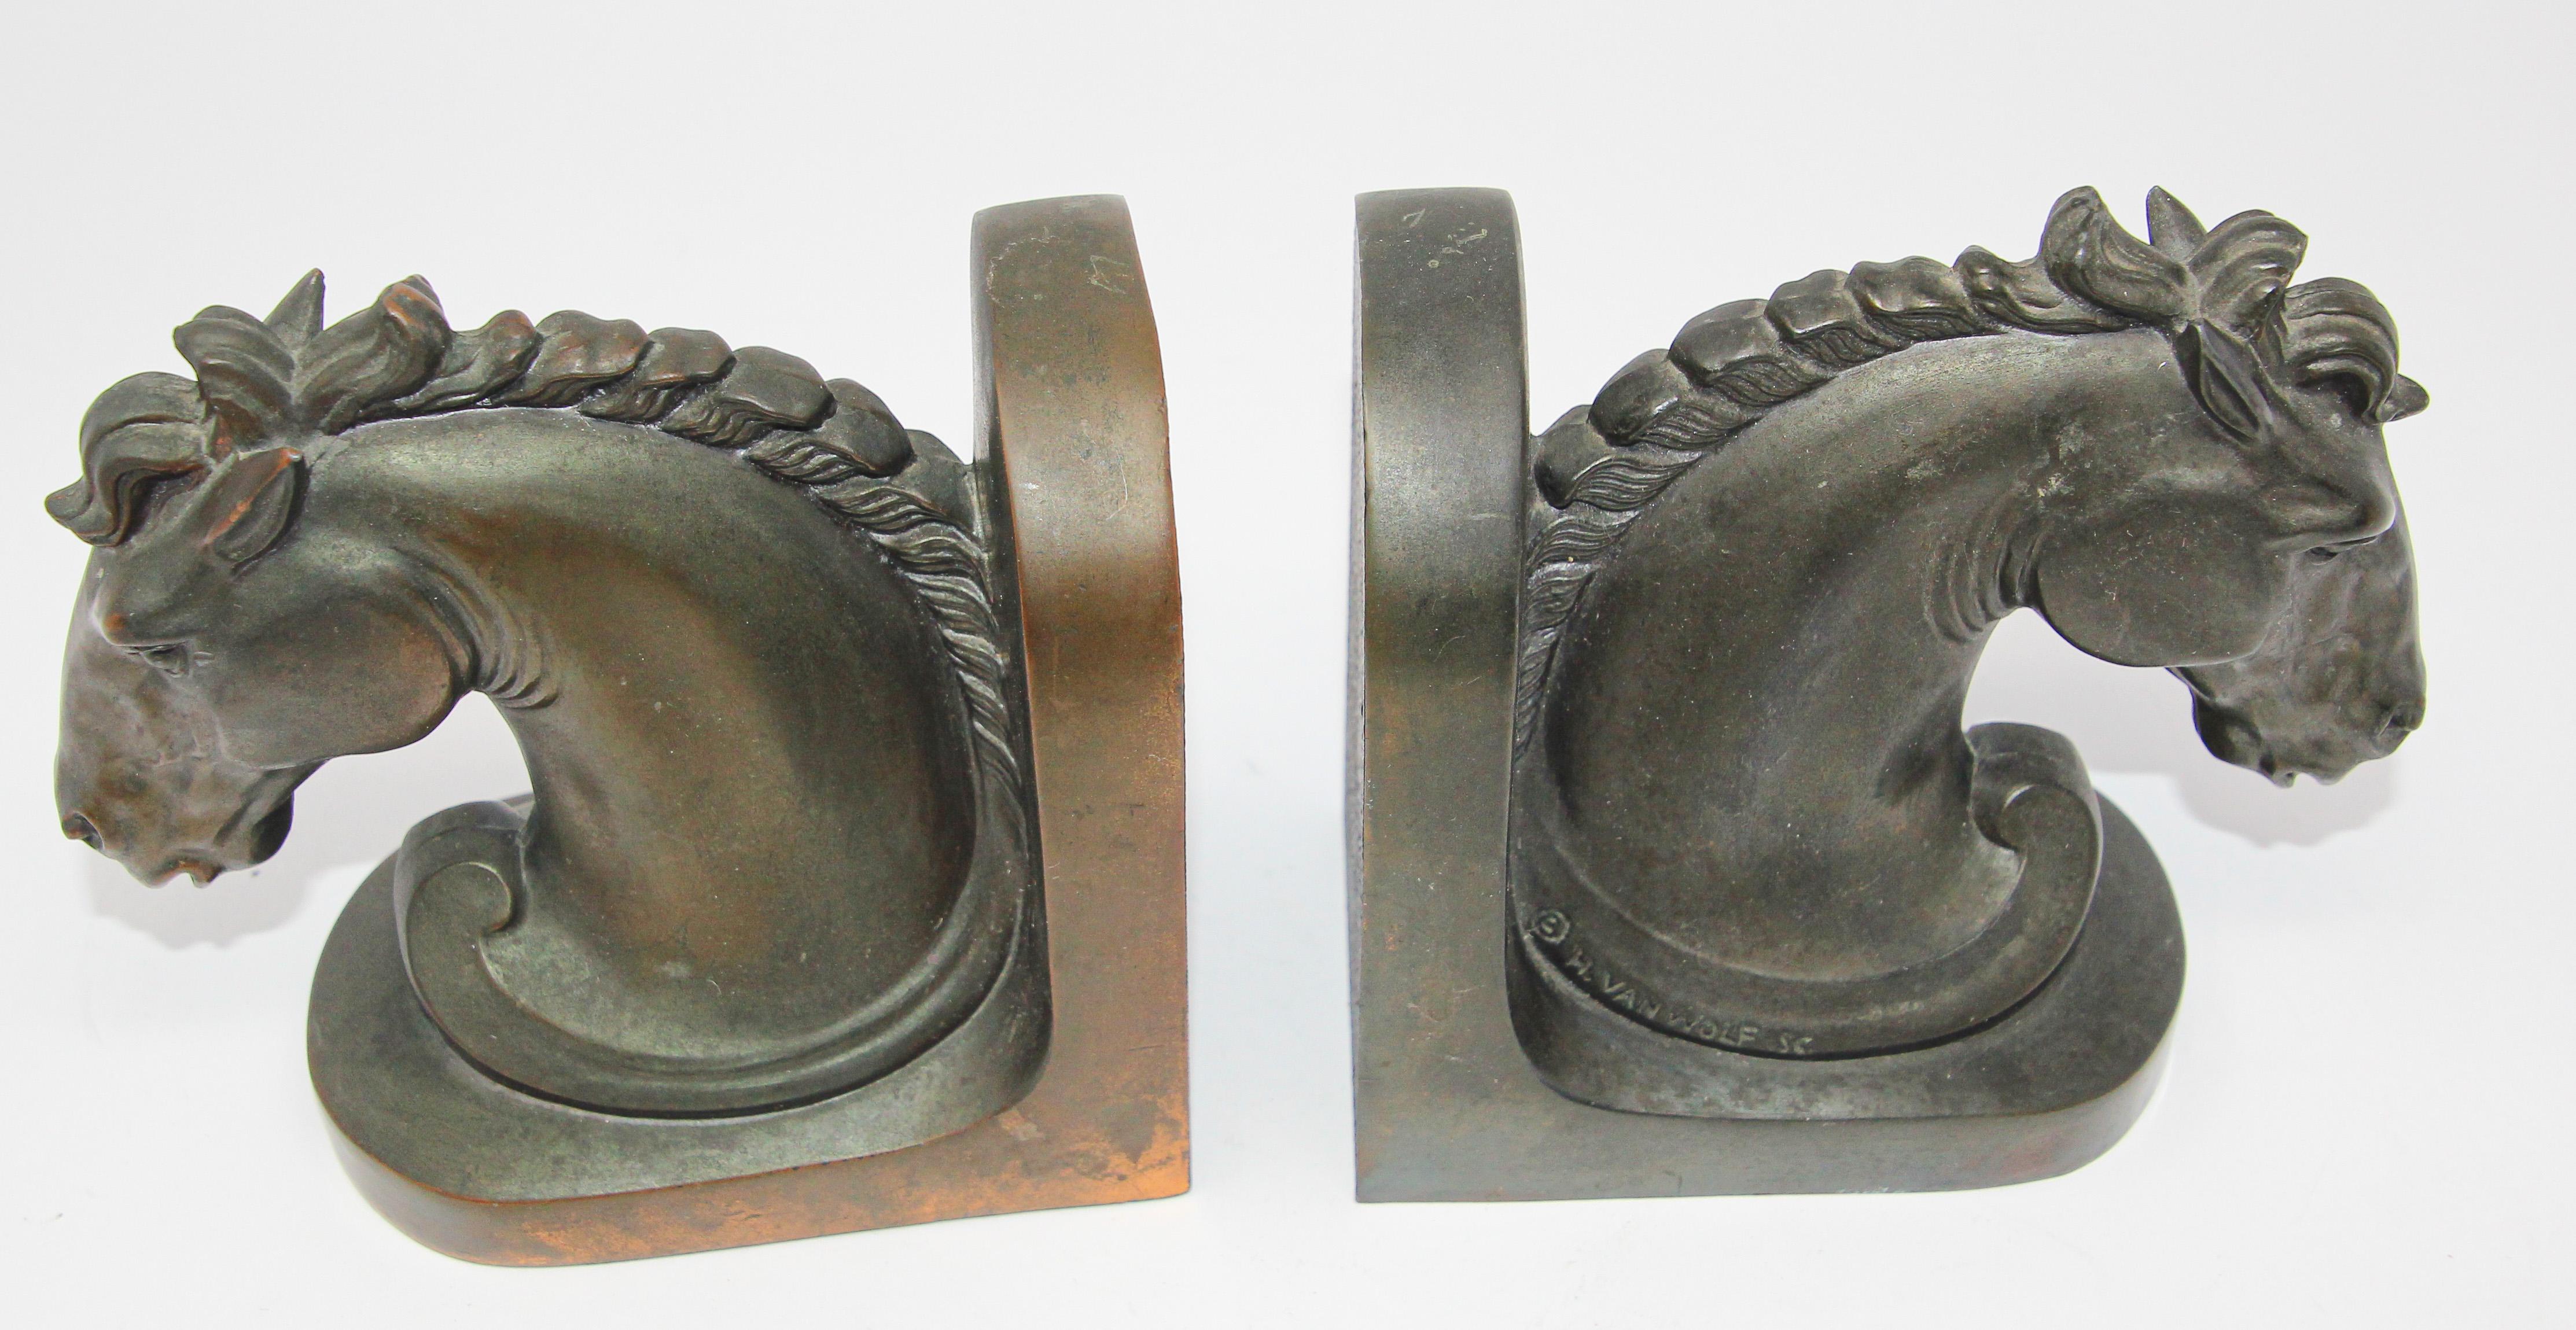 Patinated Art Deco Stylized Cast Bronze Sculptures of Horse Bust on Stand Bookends